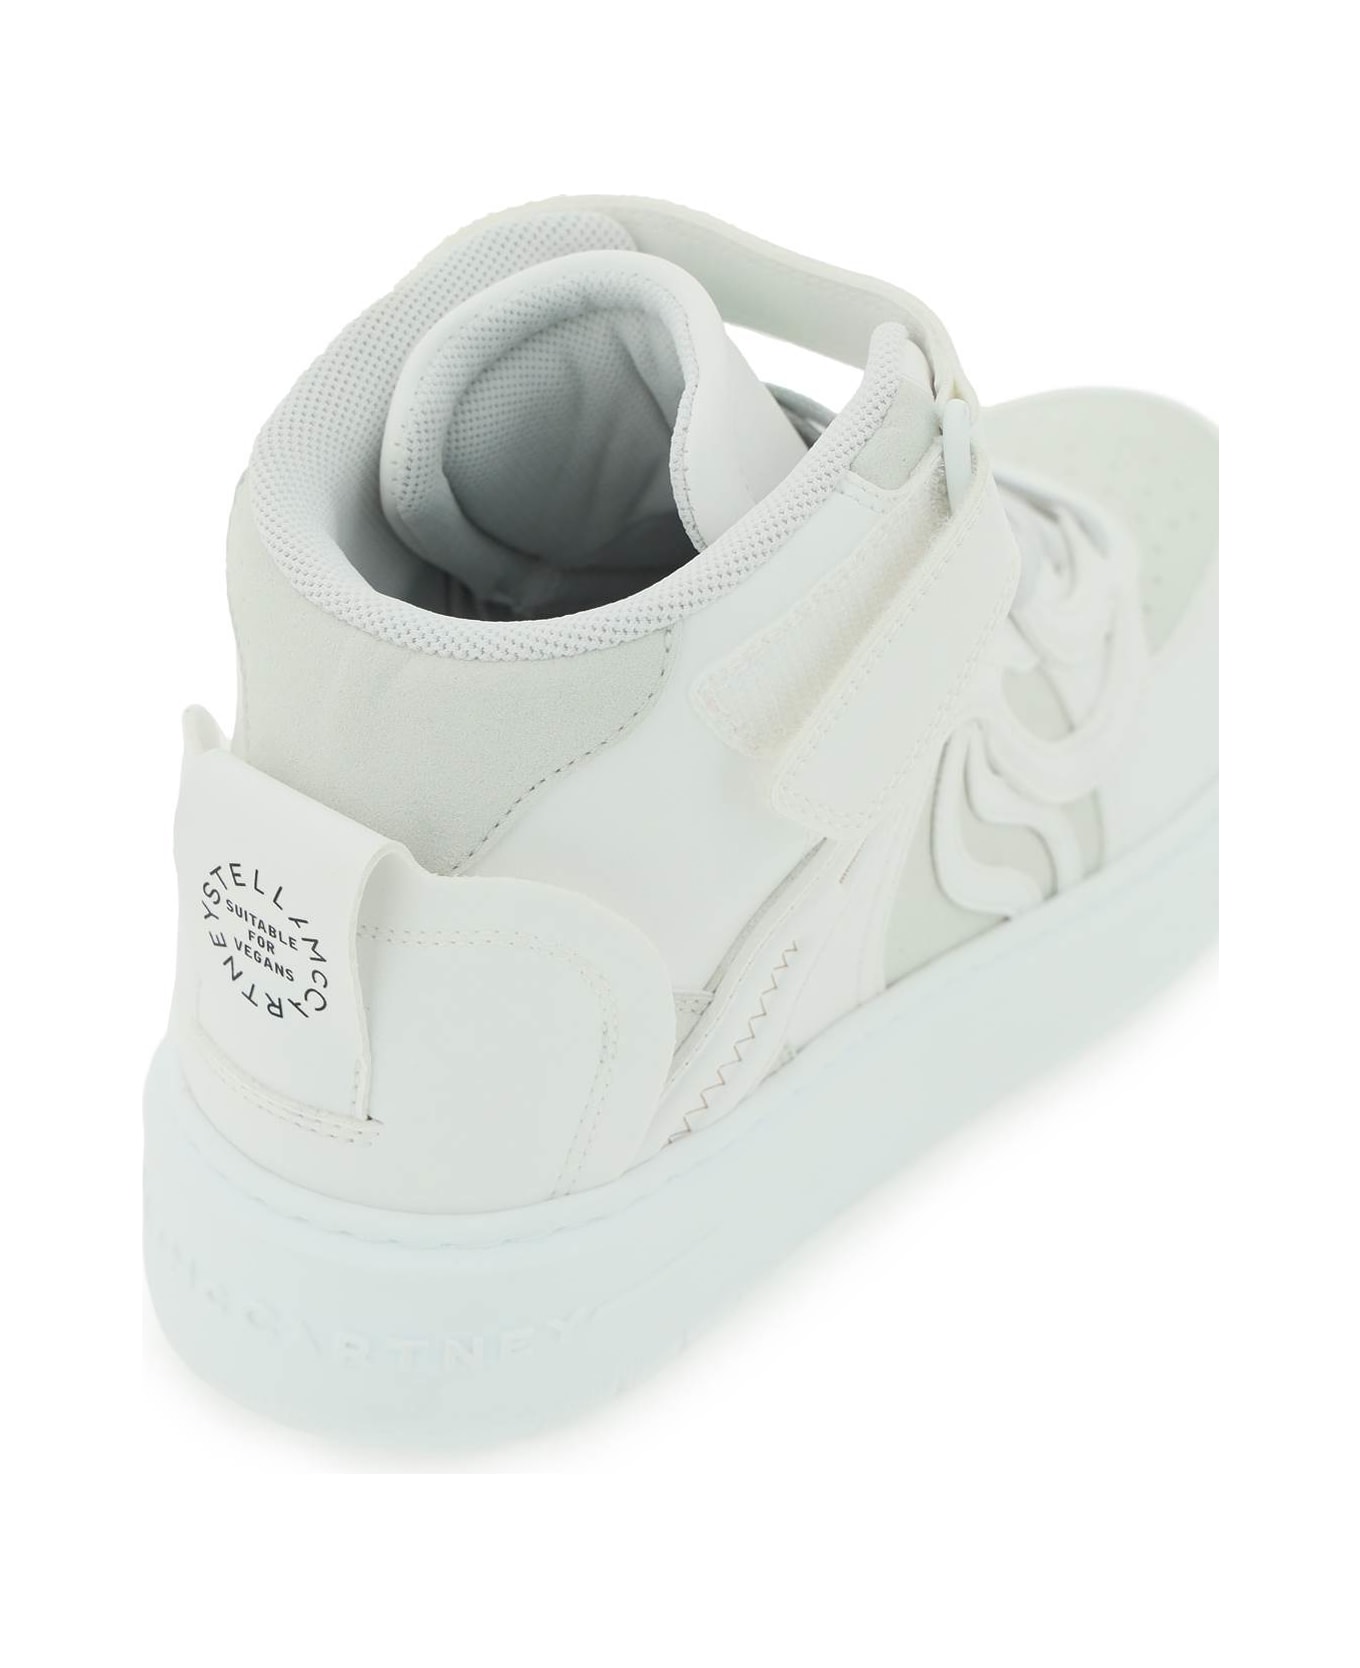 Stella McCartney S-wave High Top Sneakers - ICE (White)